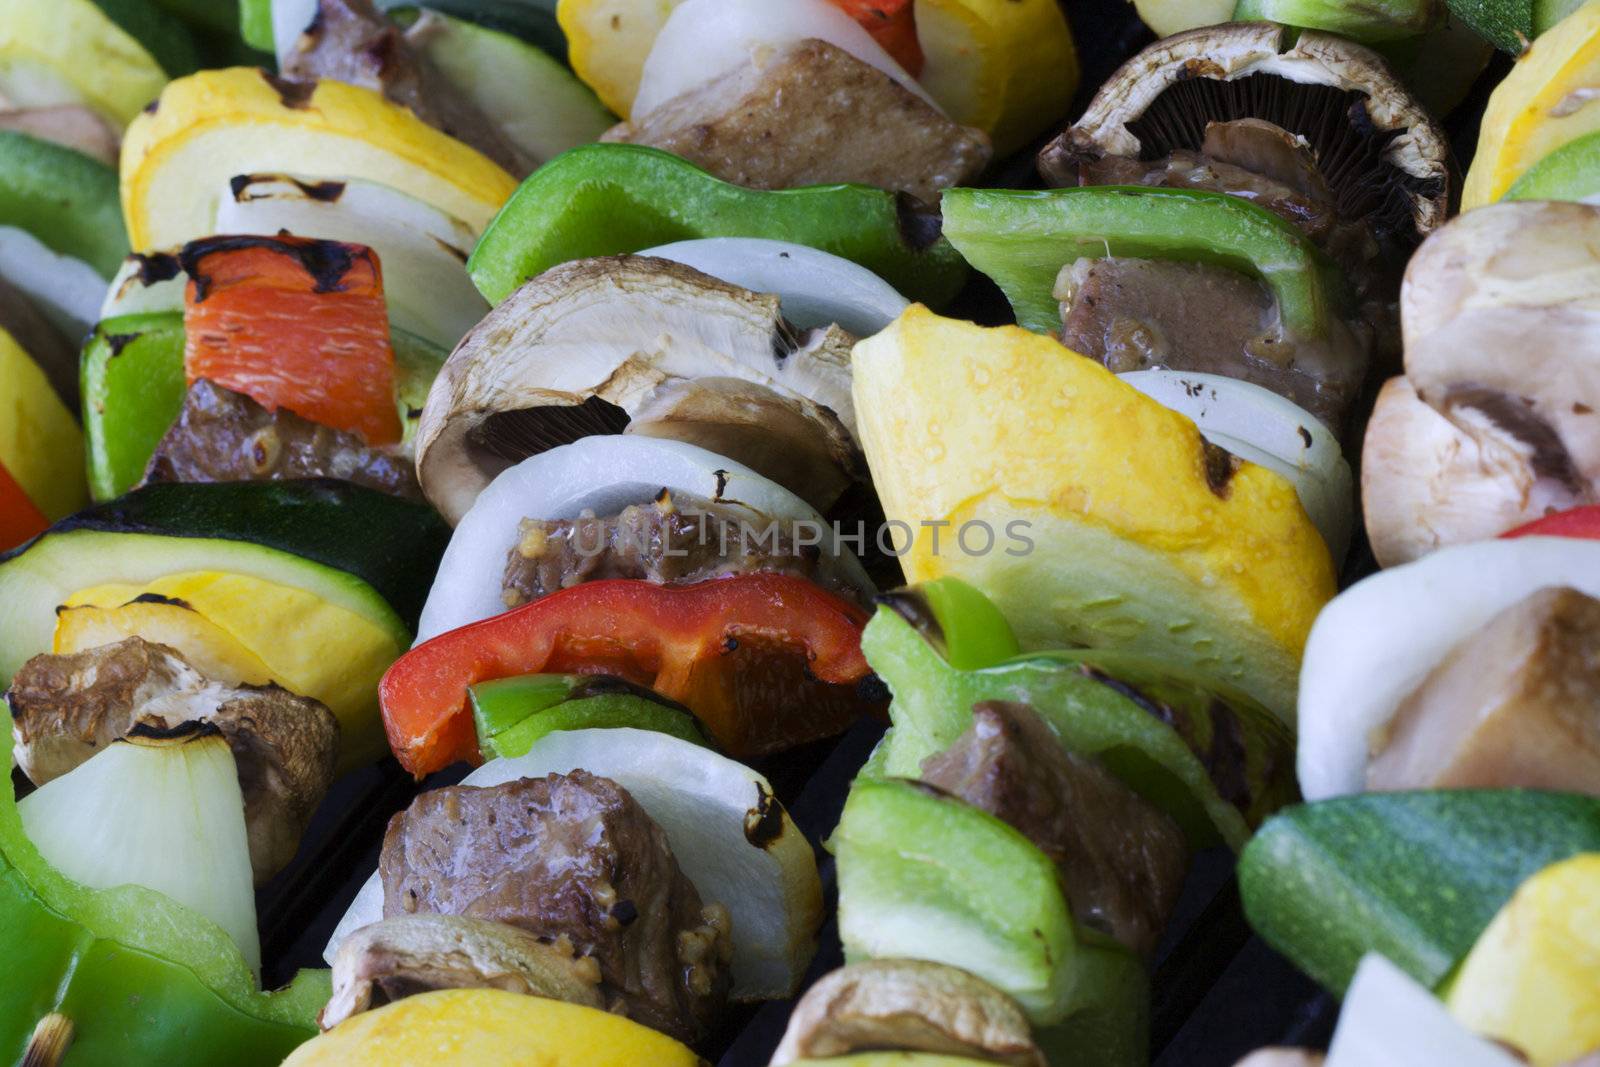 Beef shish ka bobs on the grill summer time is here cooking out has started.  Be sure to look for more bbq photo's in my portfolio.